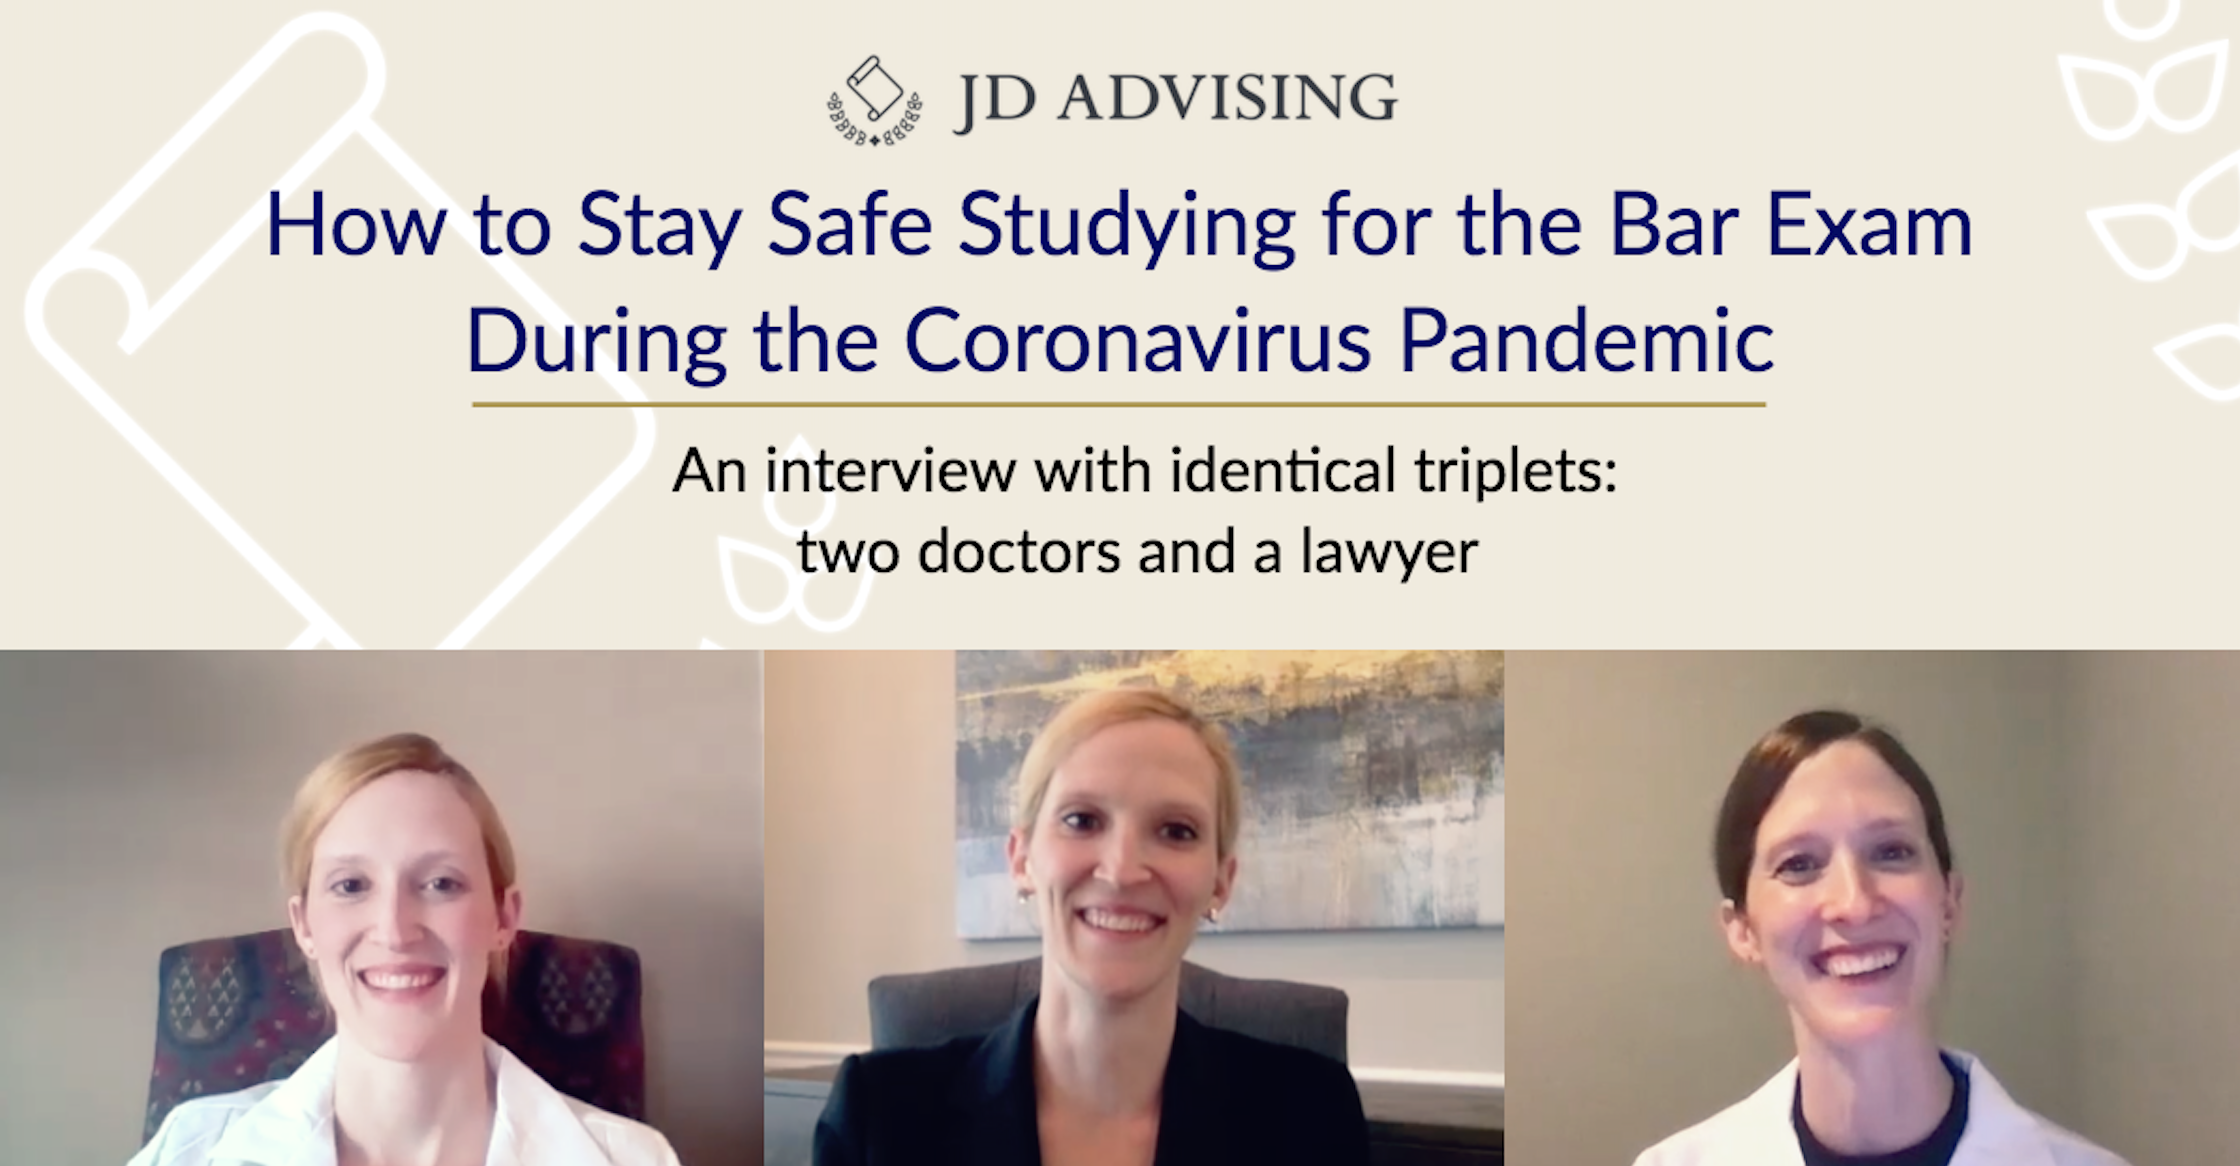 how to stay safe studying for the bar exam during the coronavirus pandemic, jd advising founder identical triplet sisters doctors